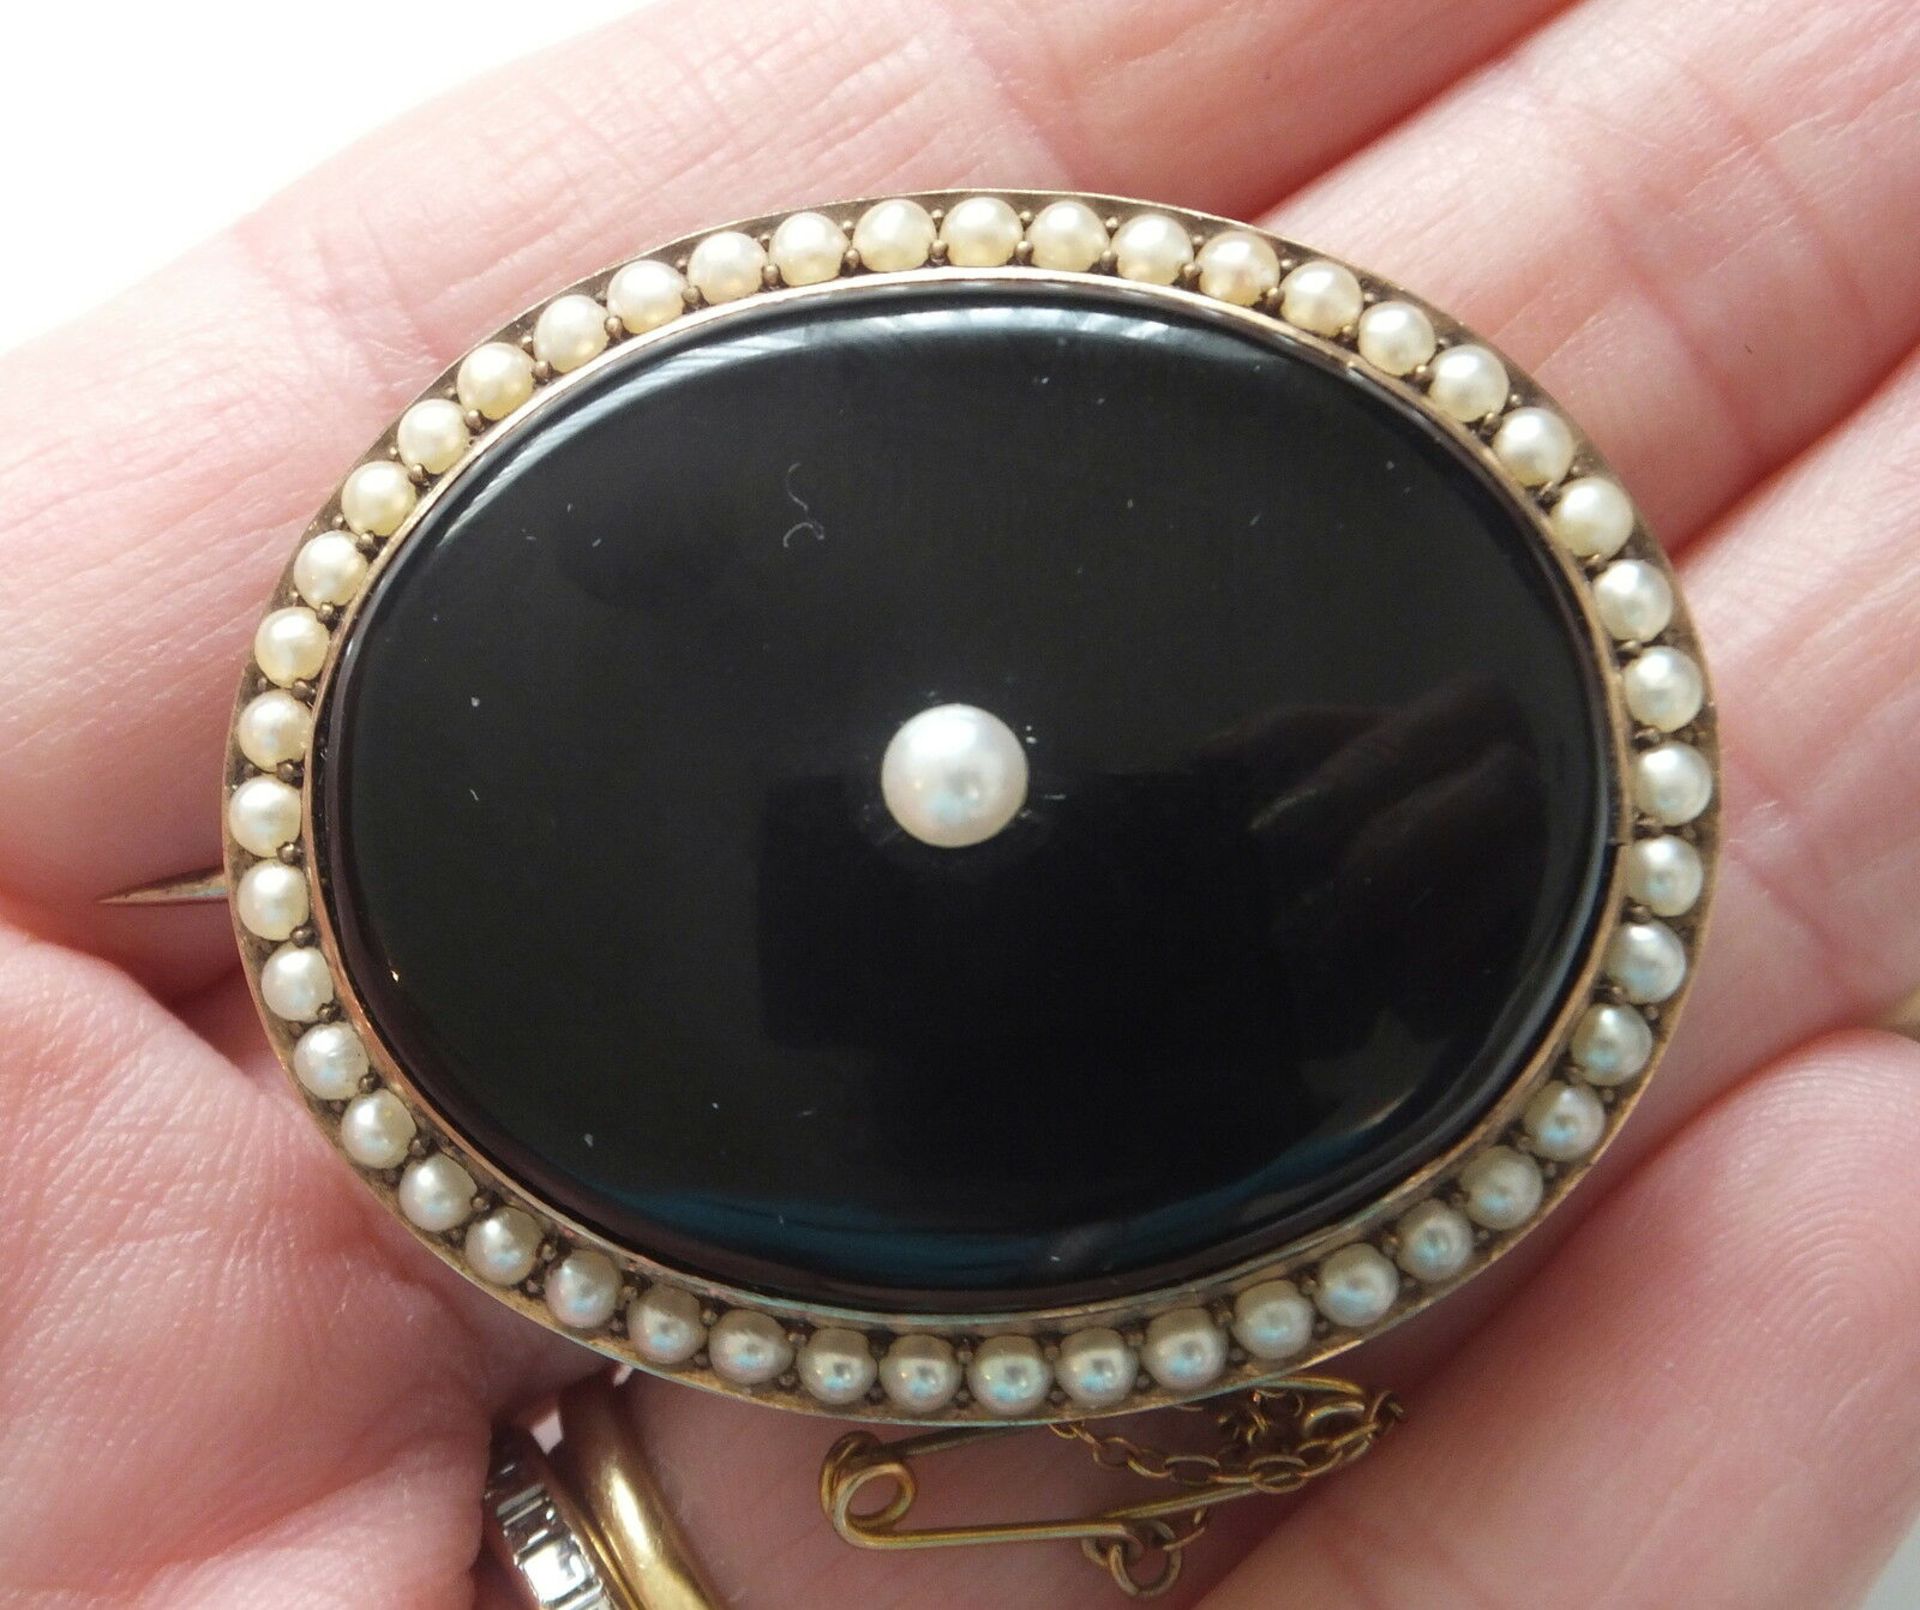 Victorian 15ct Gold Onyx & Seed Pearl Antique Locket Brooch - Image 2 of 5